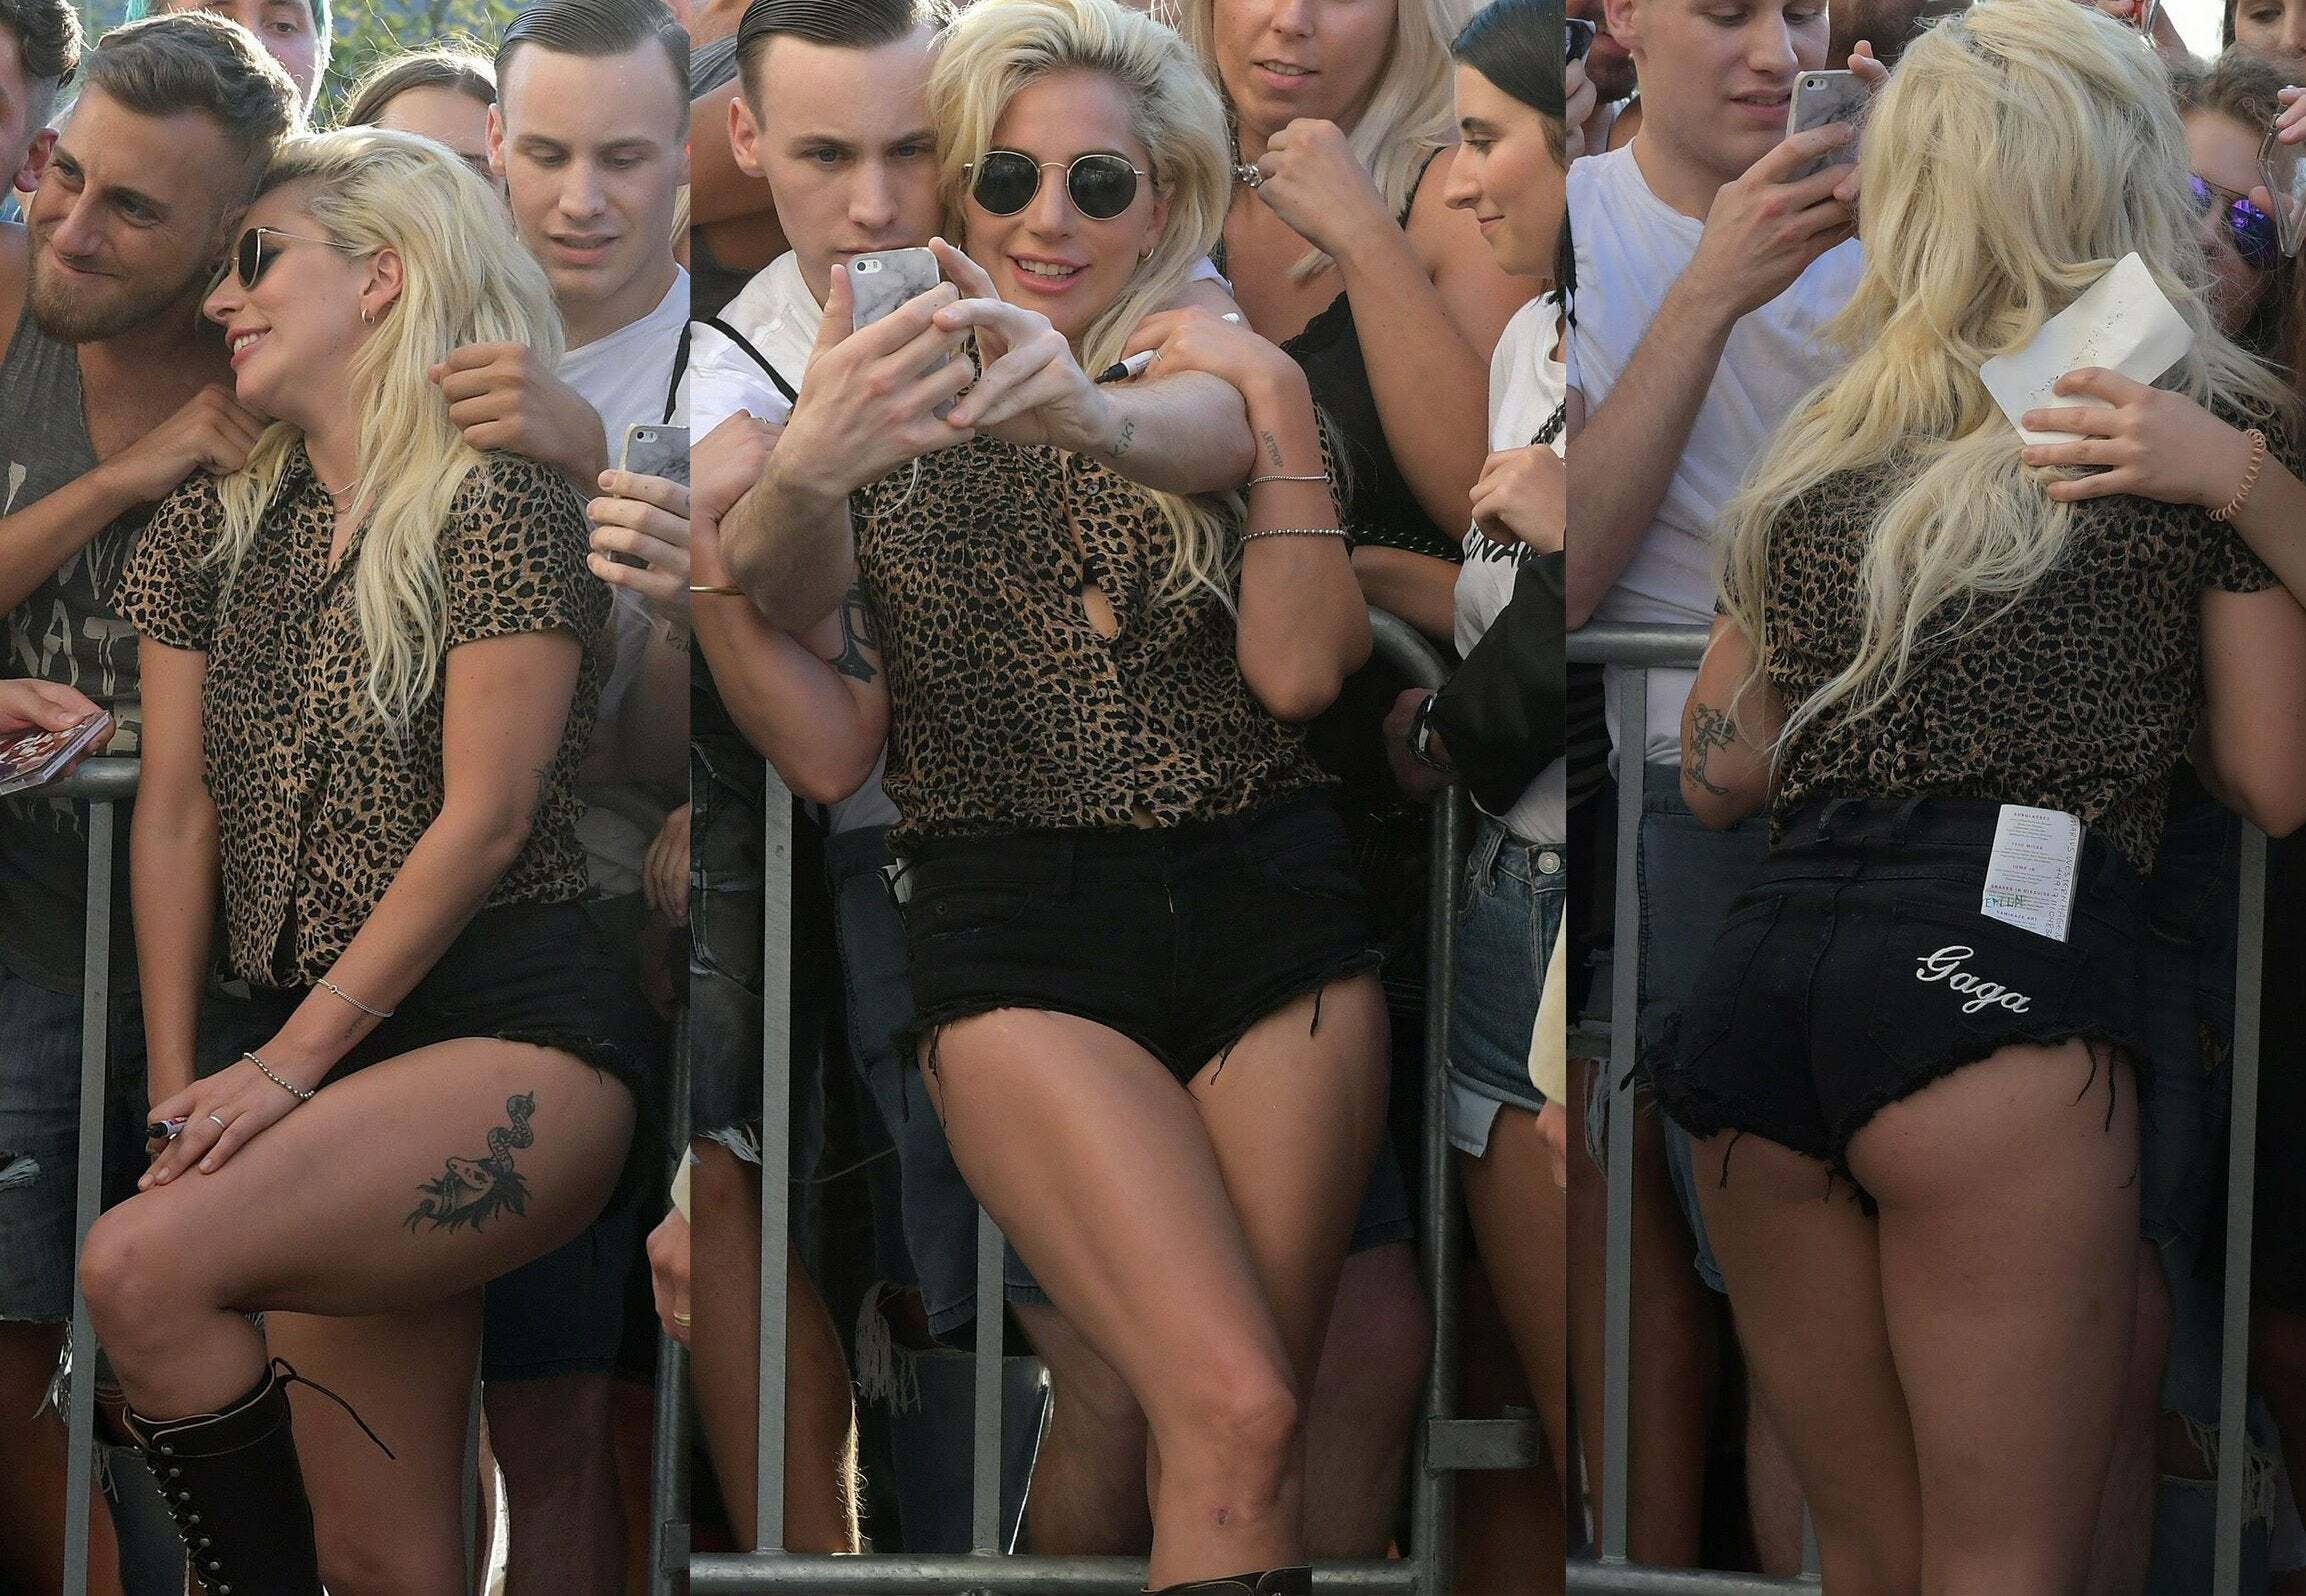 Lady Gaga and her amazing legs and ass